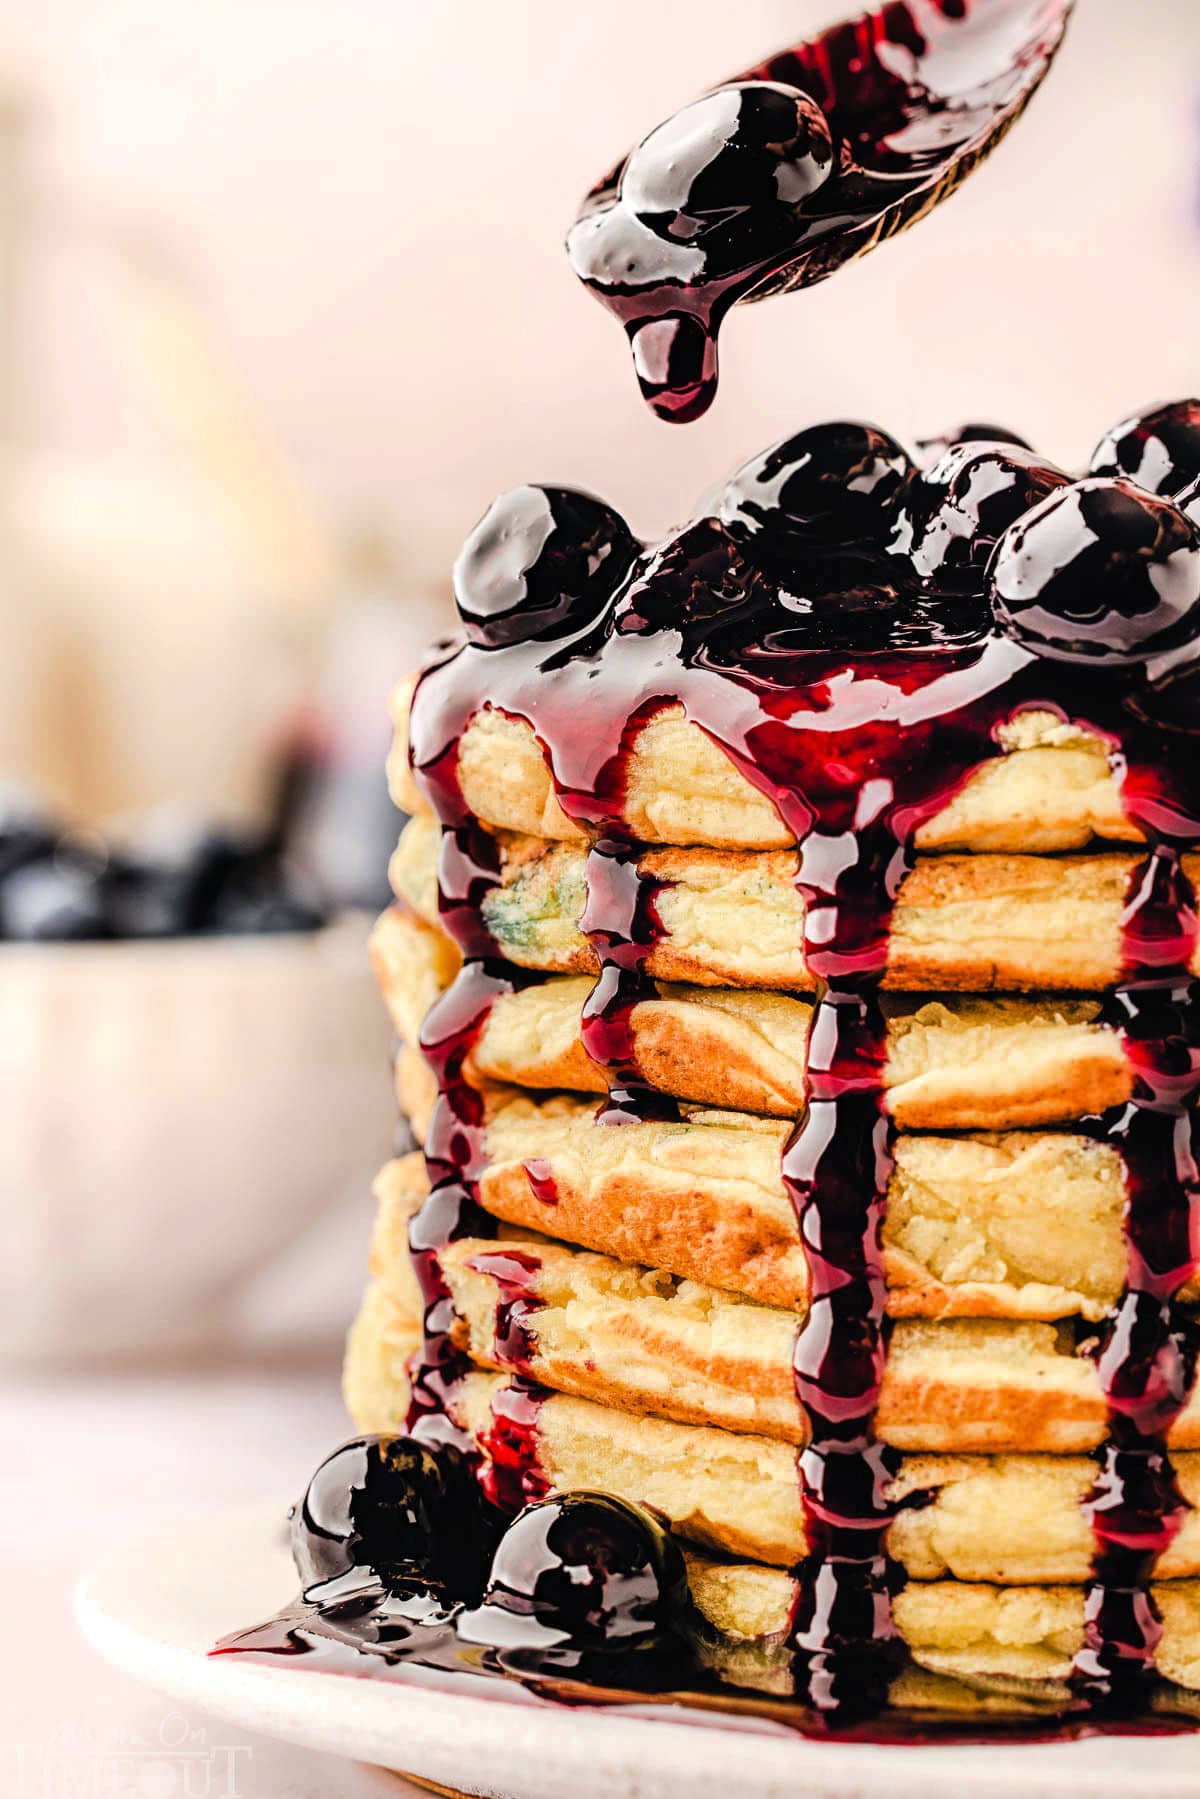 Blueberry sauce being drizzled over the top of a seriously impressive stack of lemon ricotta pancakes.